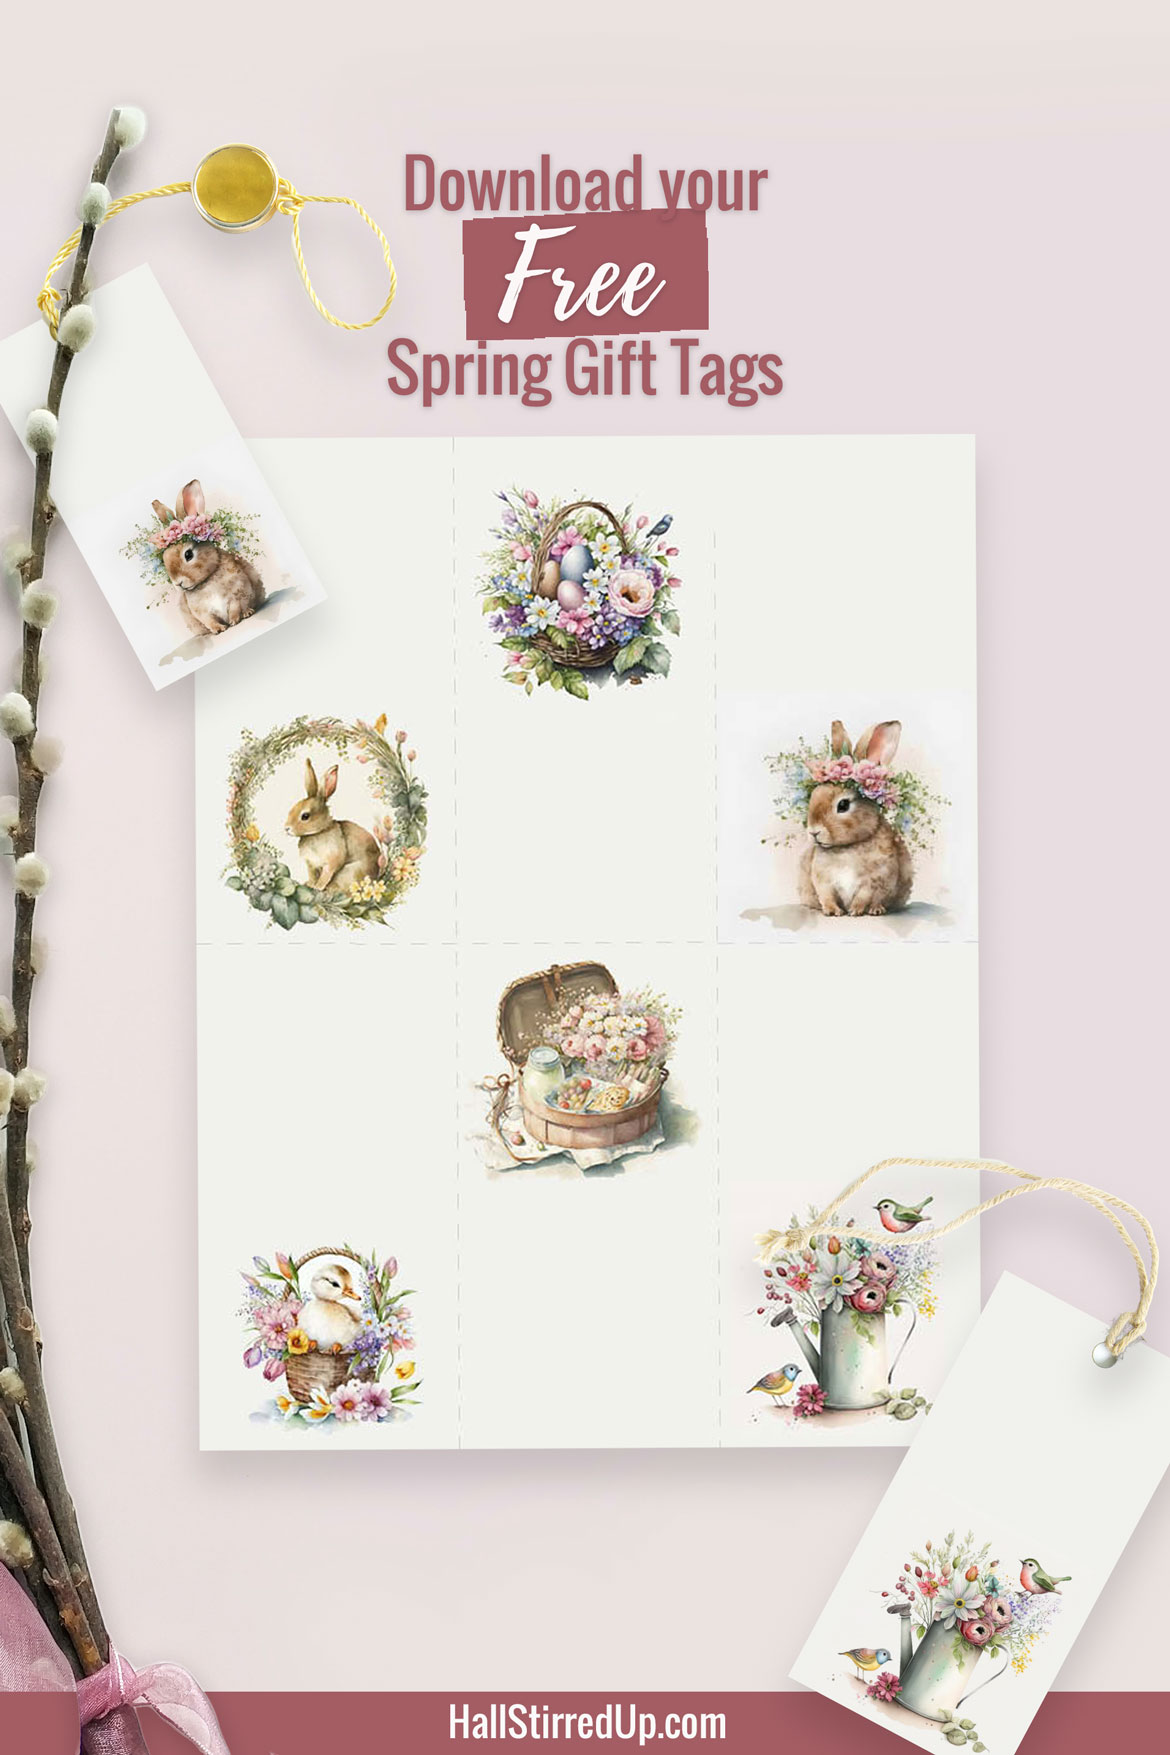 Celebrate the season with free Spring Gift Tags